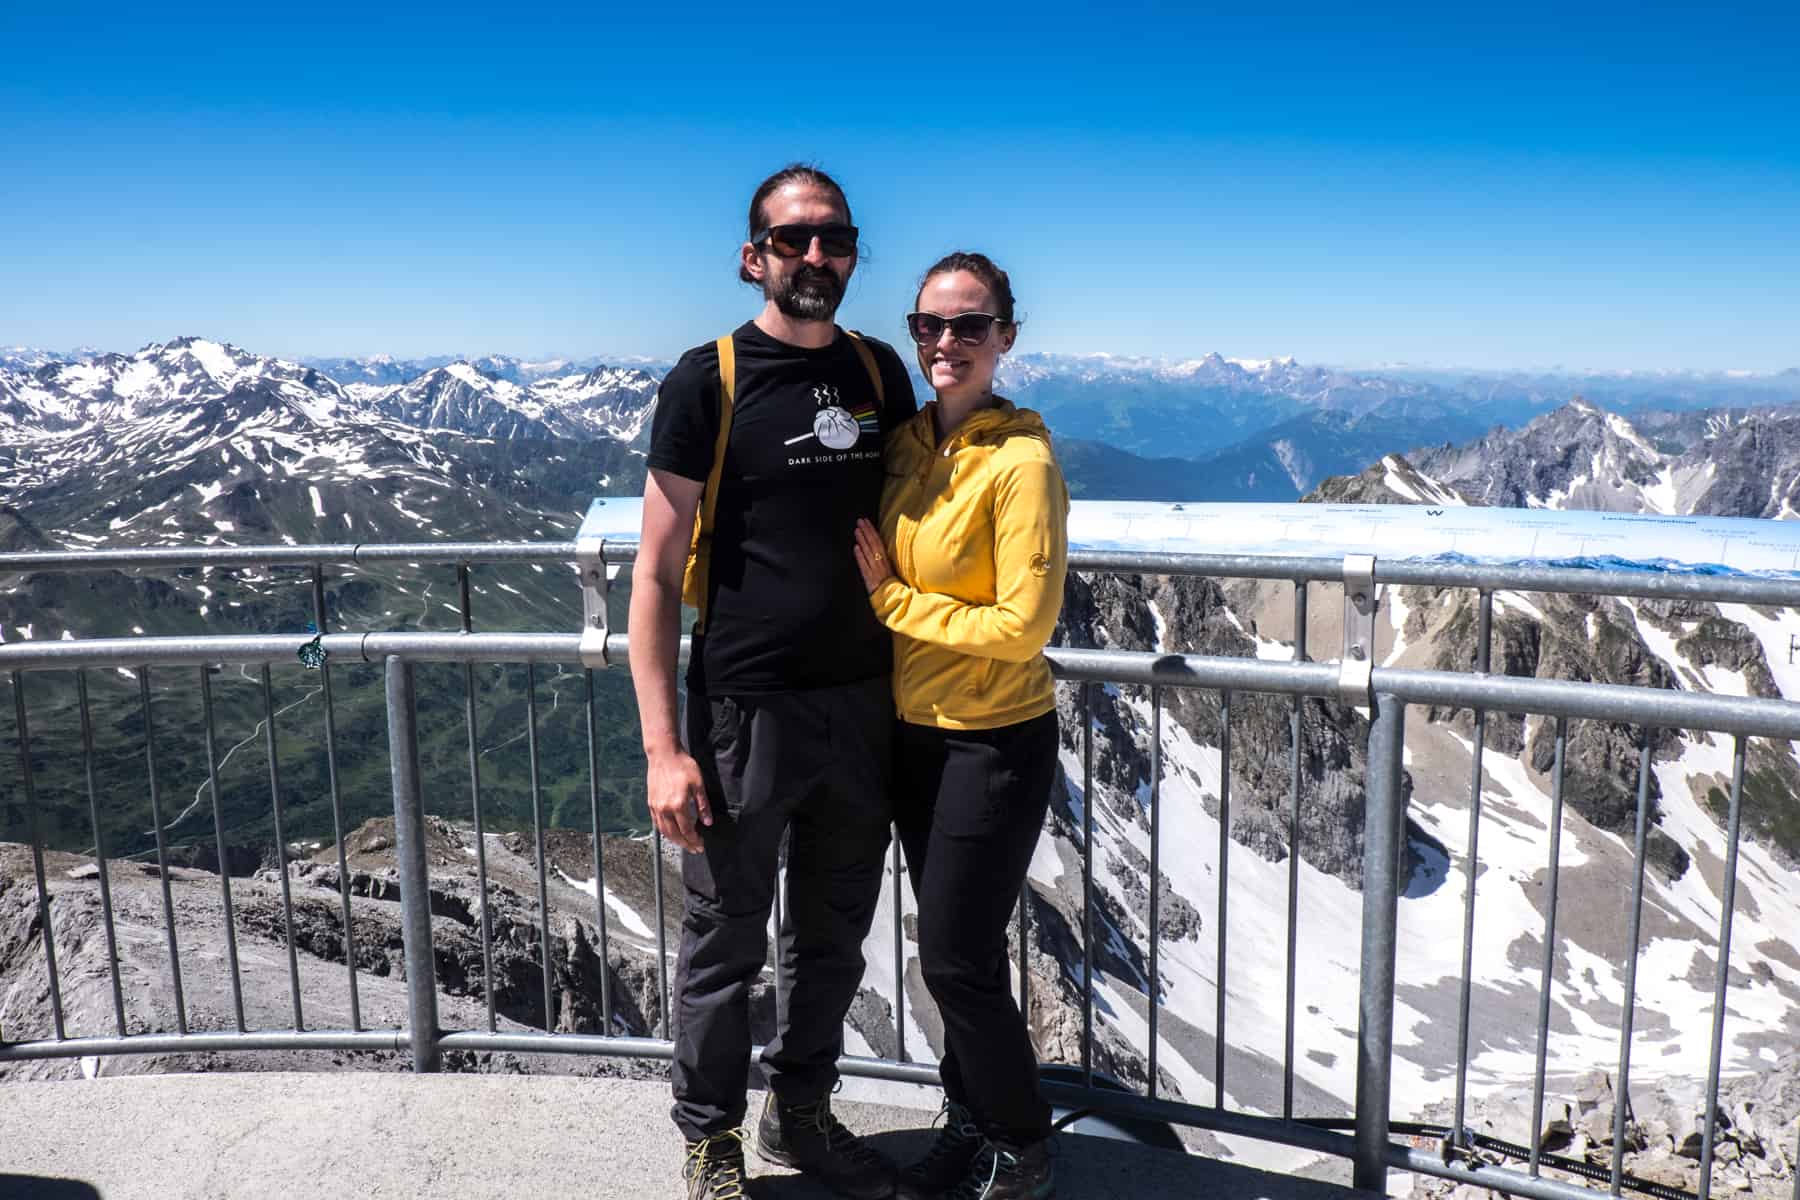 A man and woman hug standing on a mountain viewing platform in St Anton in Austria. In the background is a panorama of snow-capped Alps mountains